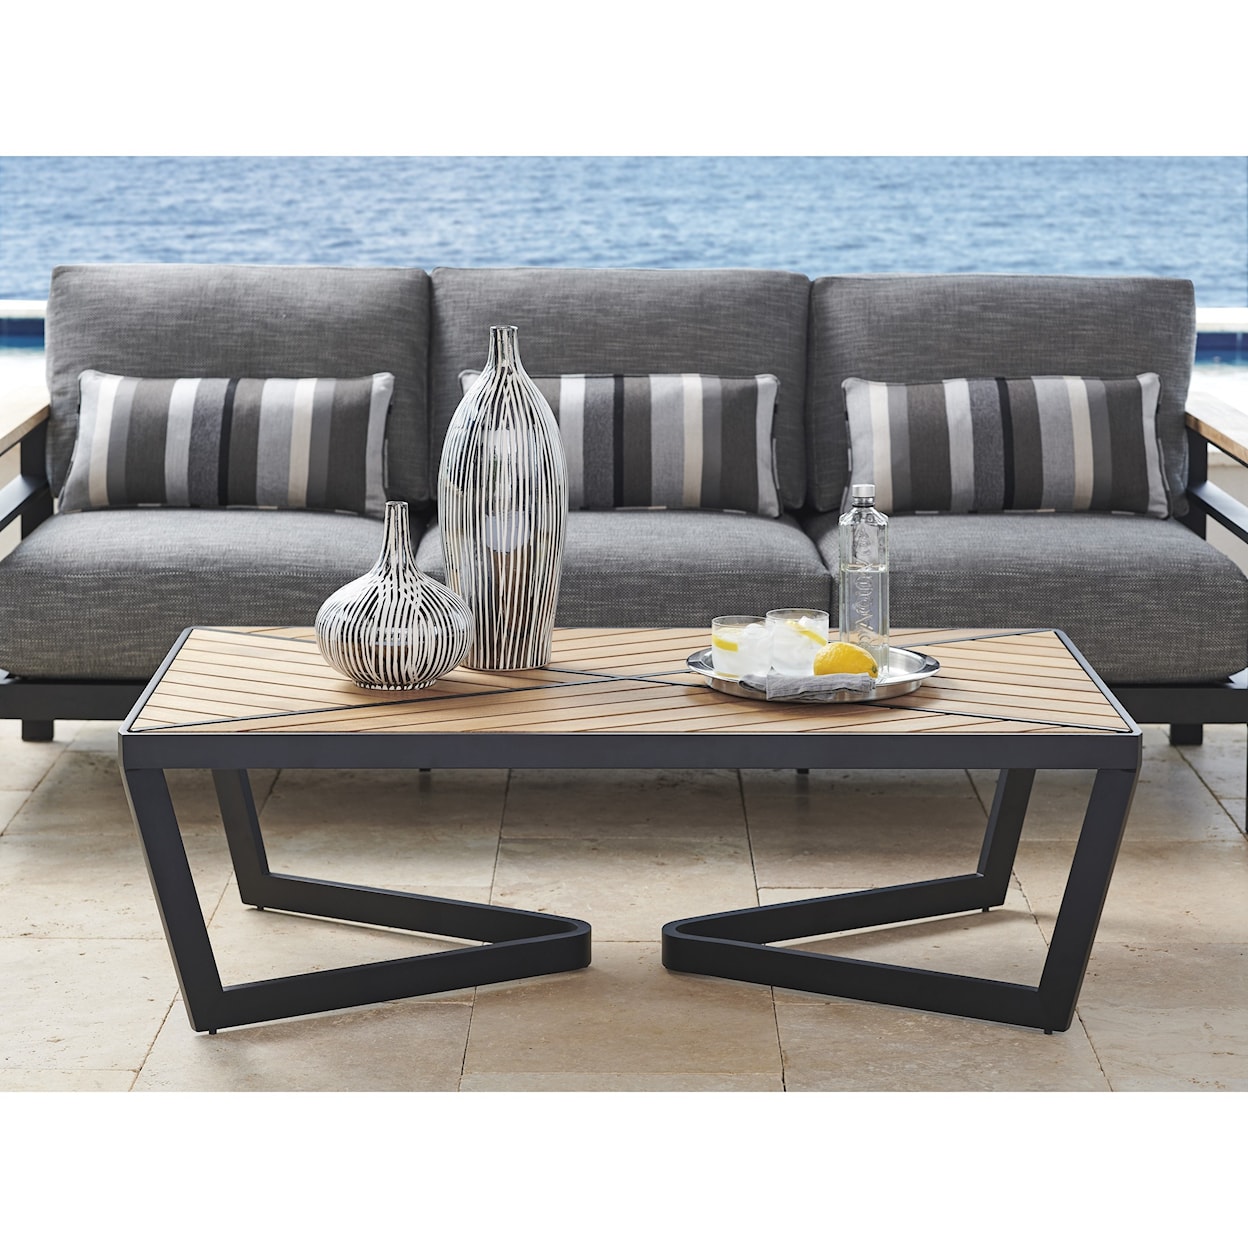 Tommy Bahama Outdoor Living South Beach Rectangular Cocktail Table